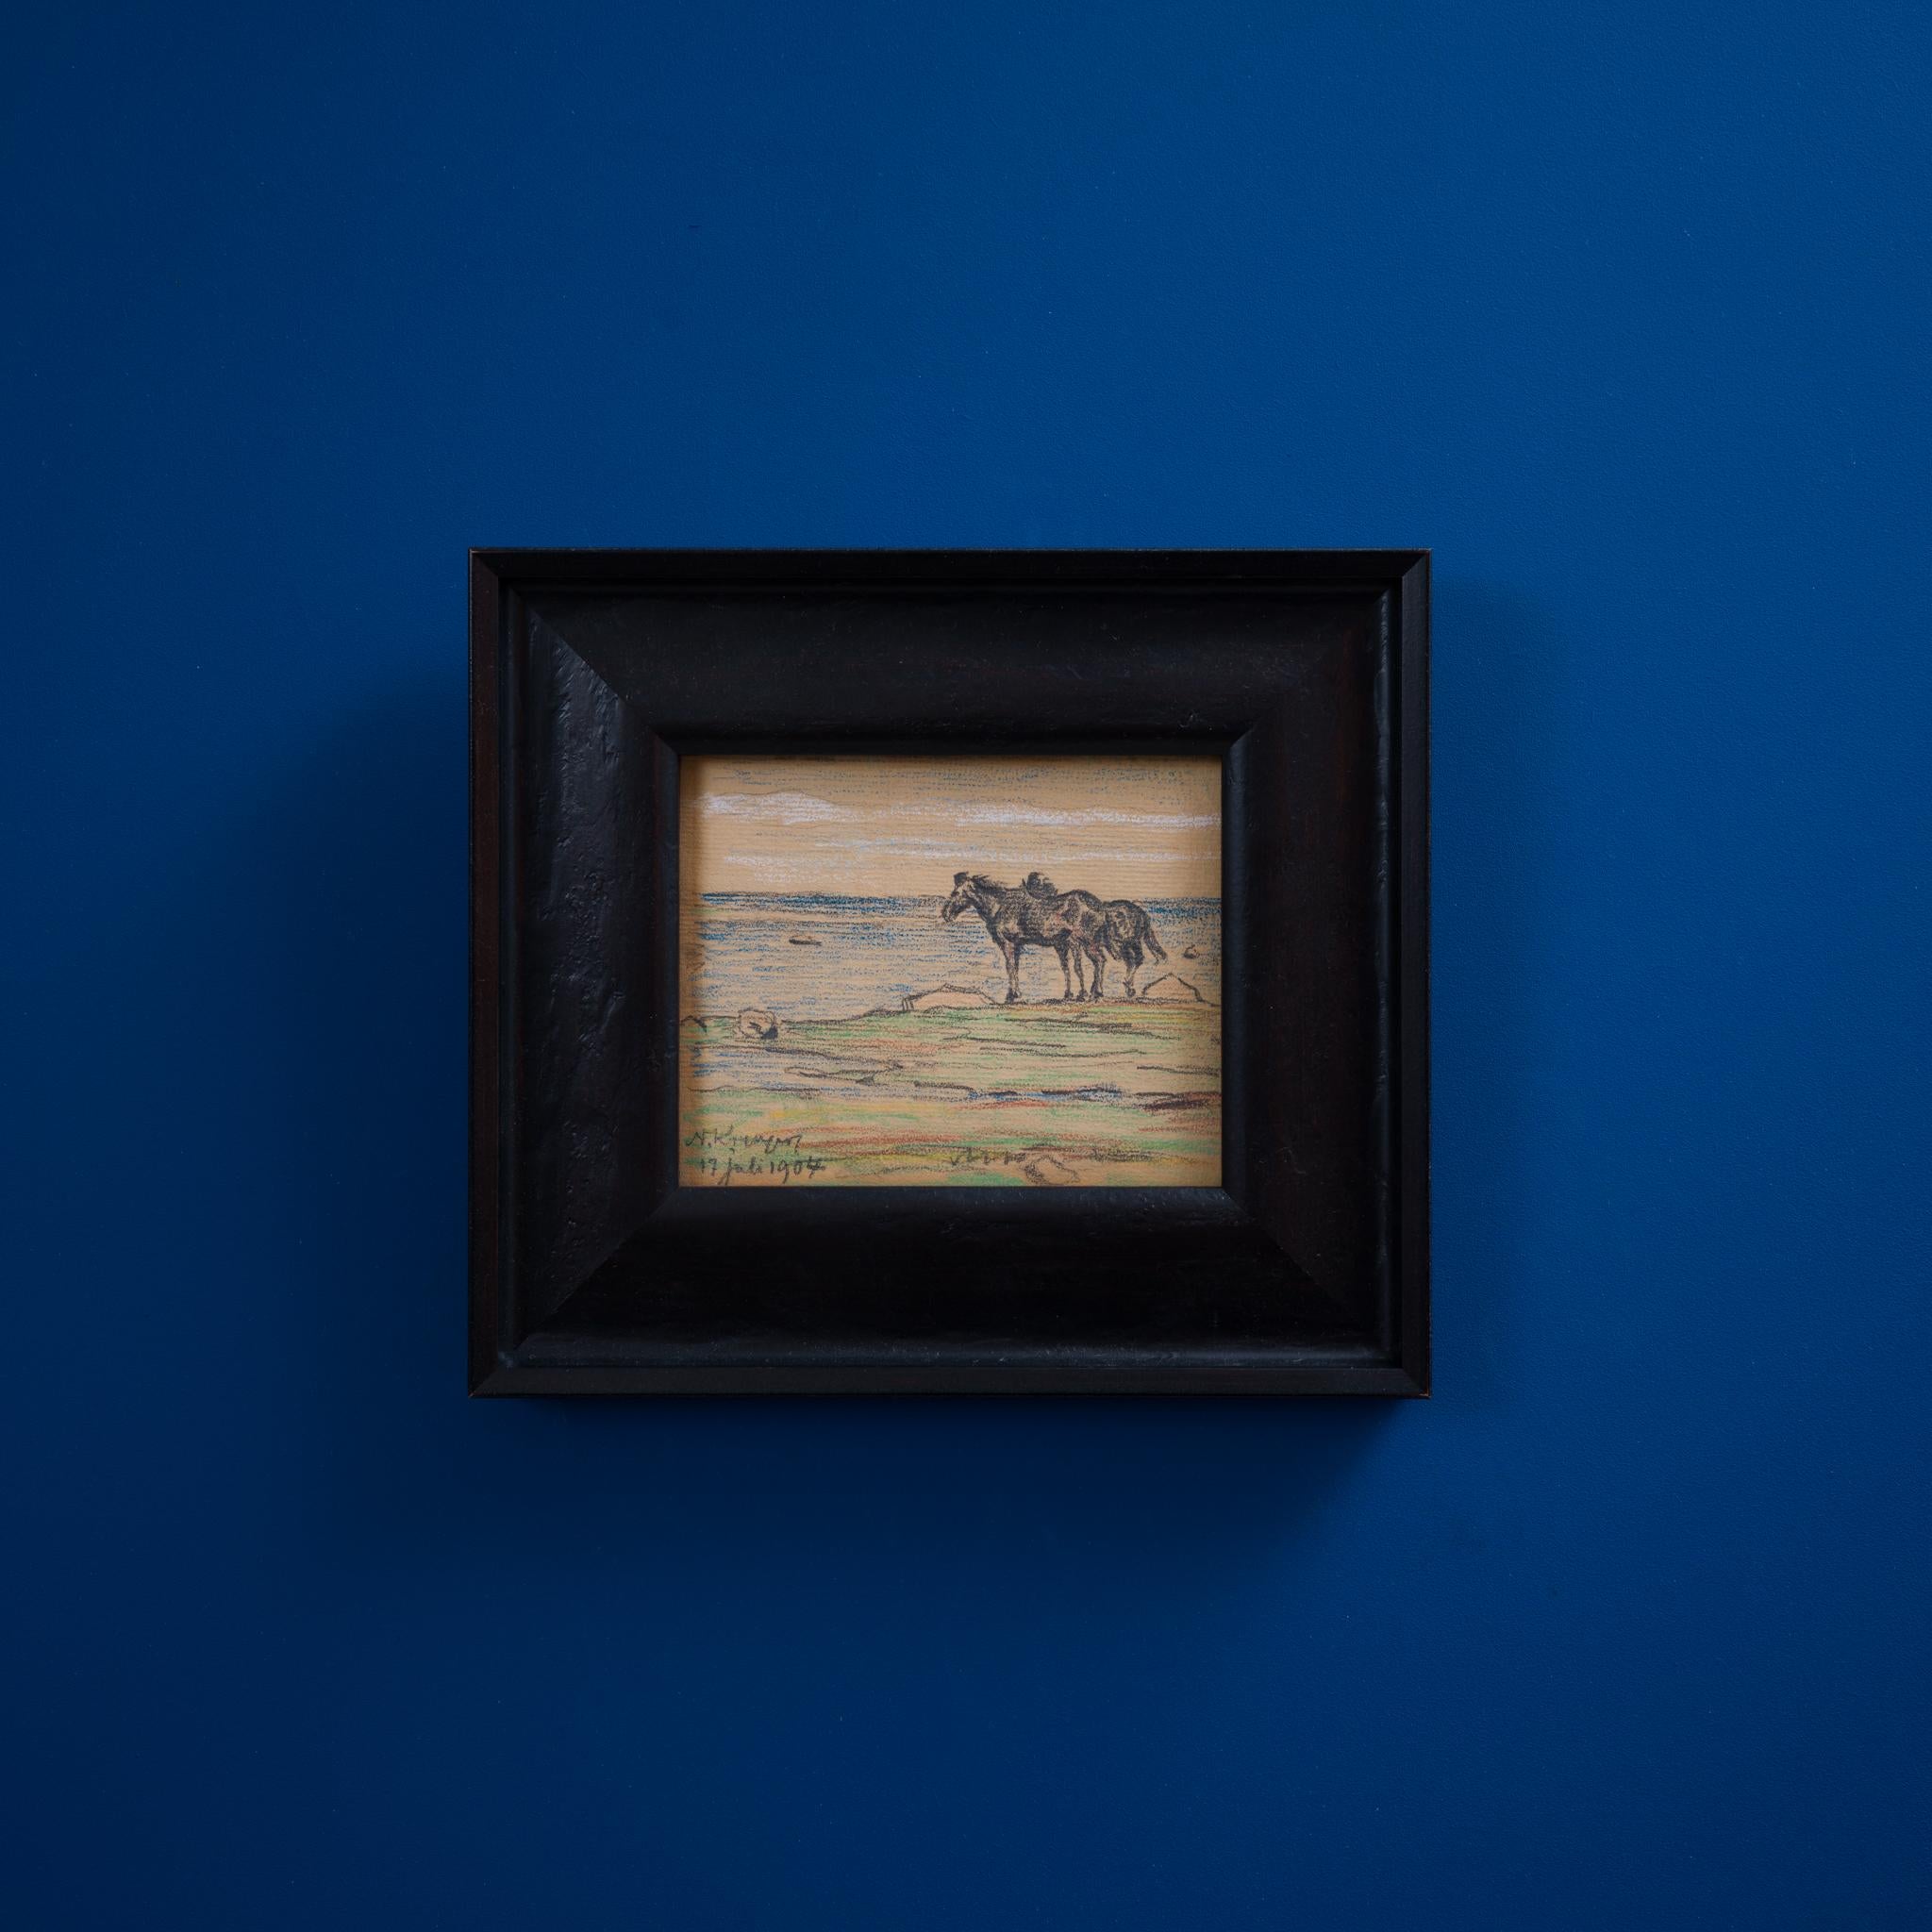 This exquisite small pastel painting by the renowned Swedish artist Nils Kreuger measuring just 11 x 14 cm. Signed and dated July 17, 1904, the artwork delicately portrays two horses at the brink of the Baltic Sea, a tranquil scene likely from the